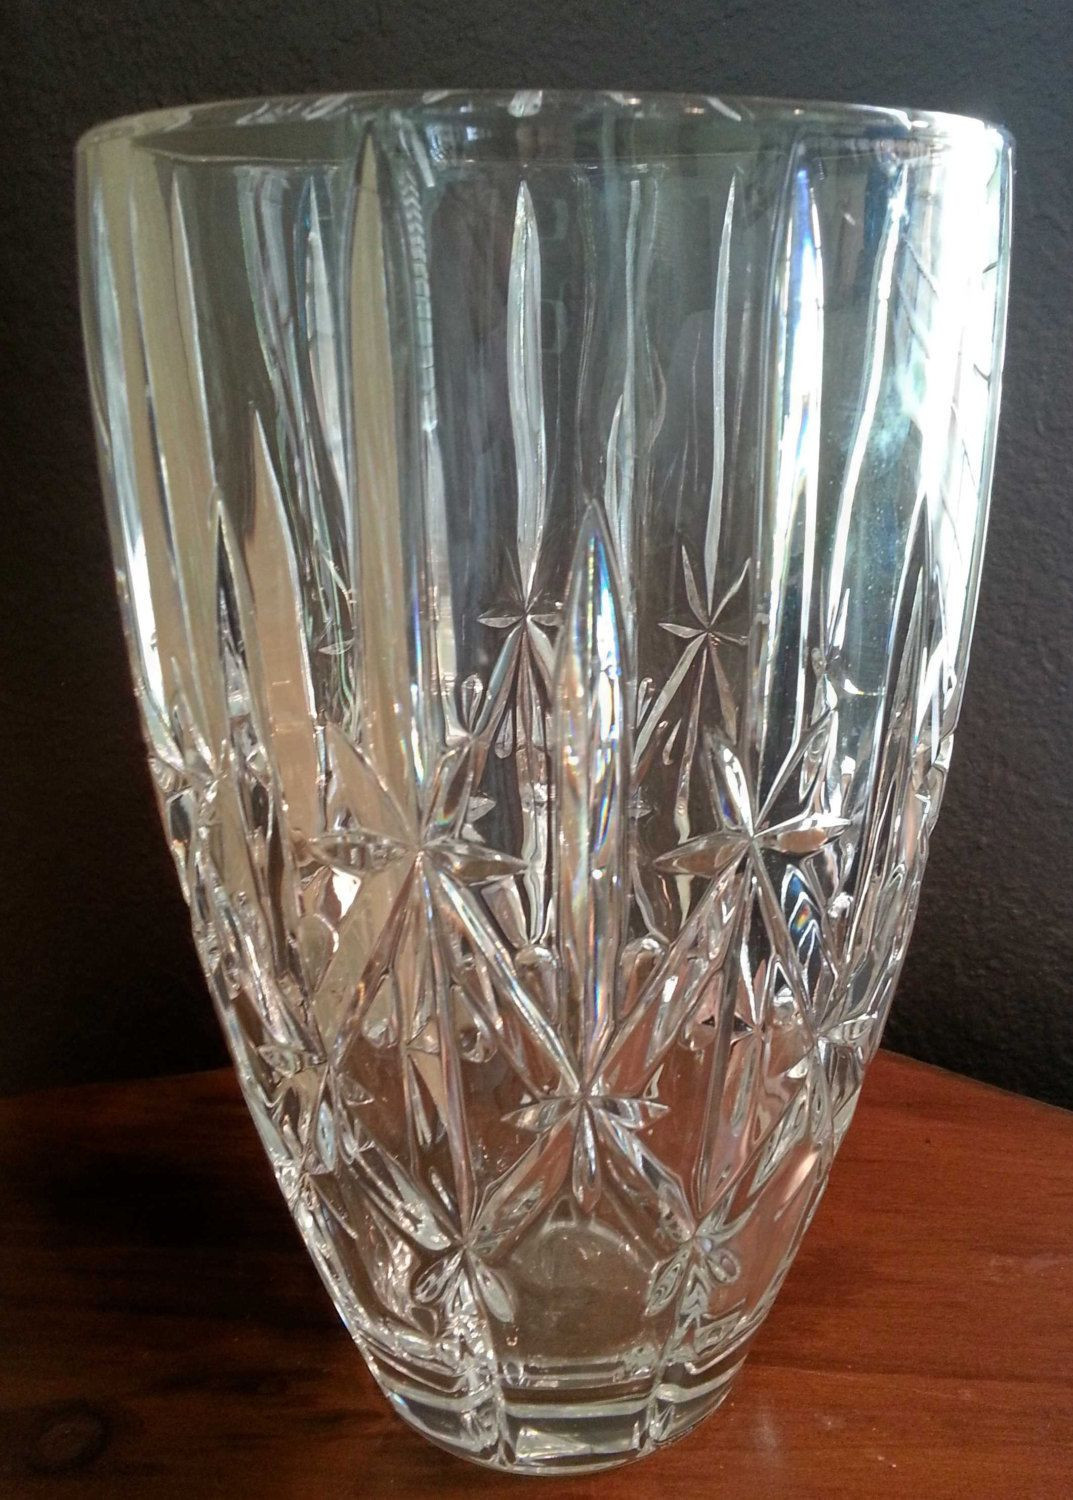 15 Stunning Marquis by Waterford 9 Inch Vase 2024 free download marquis by waterford 9 inch vase of waterford crystal vases pics marquis by waterford sparkle 9 inch with marquis by waterford sparkle 9 inch vase crystal vase